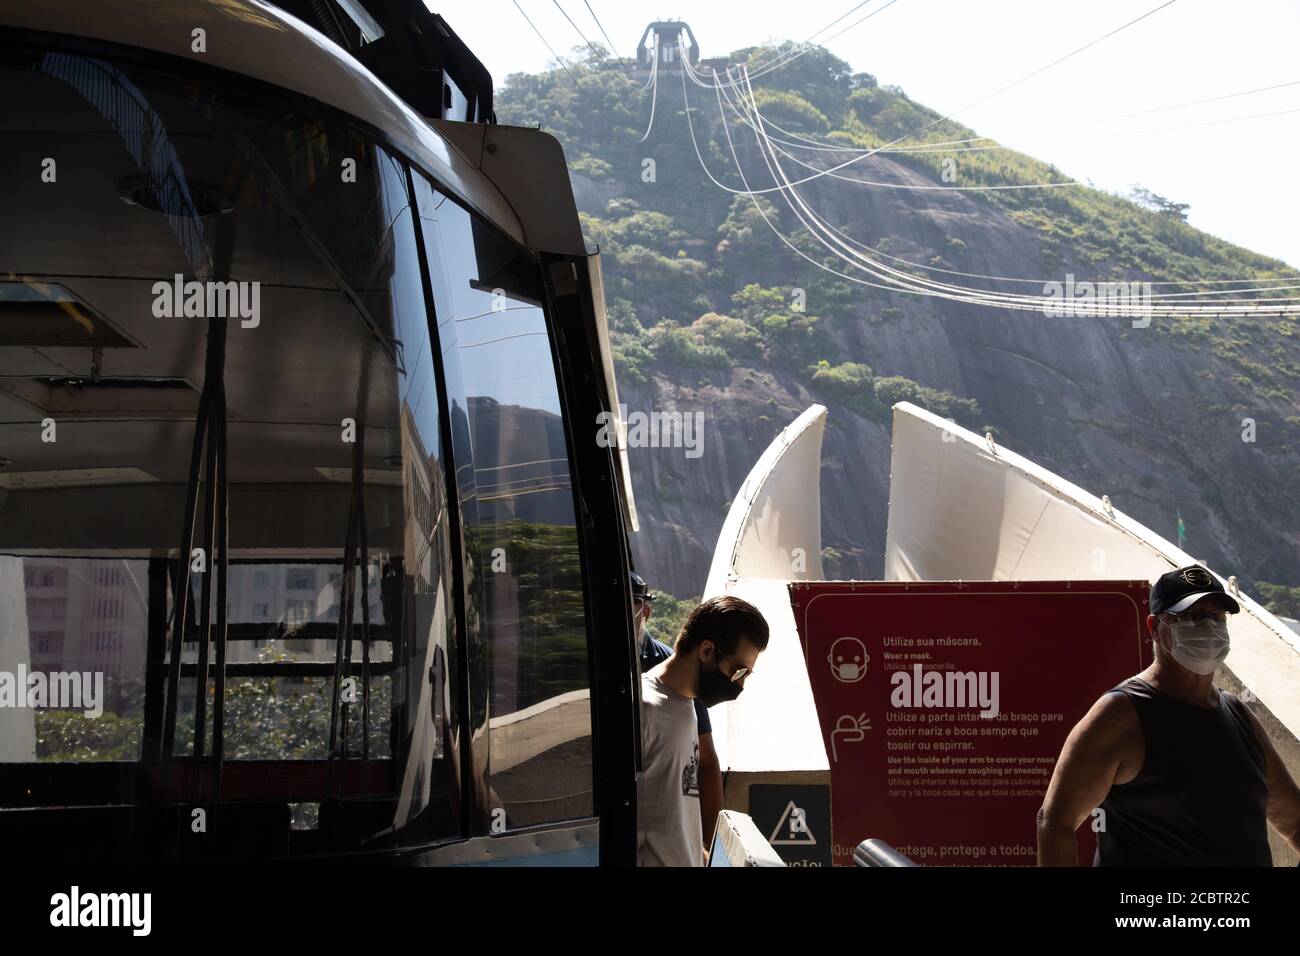 Rio De Janeiro, Brazil. 15th Aug, 2020. People with mouthguards leave the Bondinho, the cable car at Sugar Loaf Mountain, which has reopened after months of closure. Brazil is currently the second most affected country worldwide by the corona virus. Credit: Ian Cheibub/dpa/Alamy Live News Stock Photo